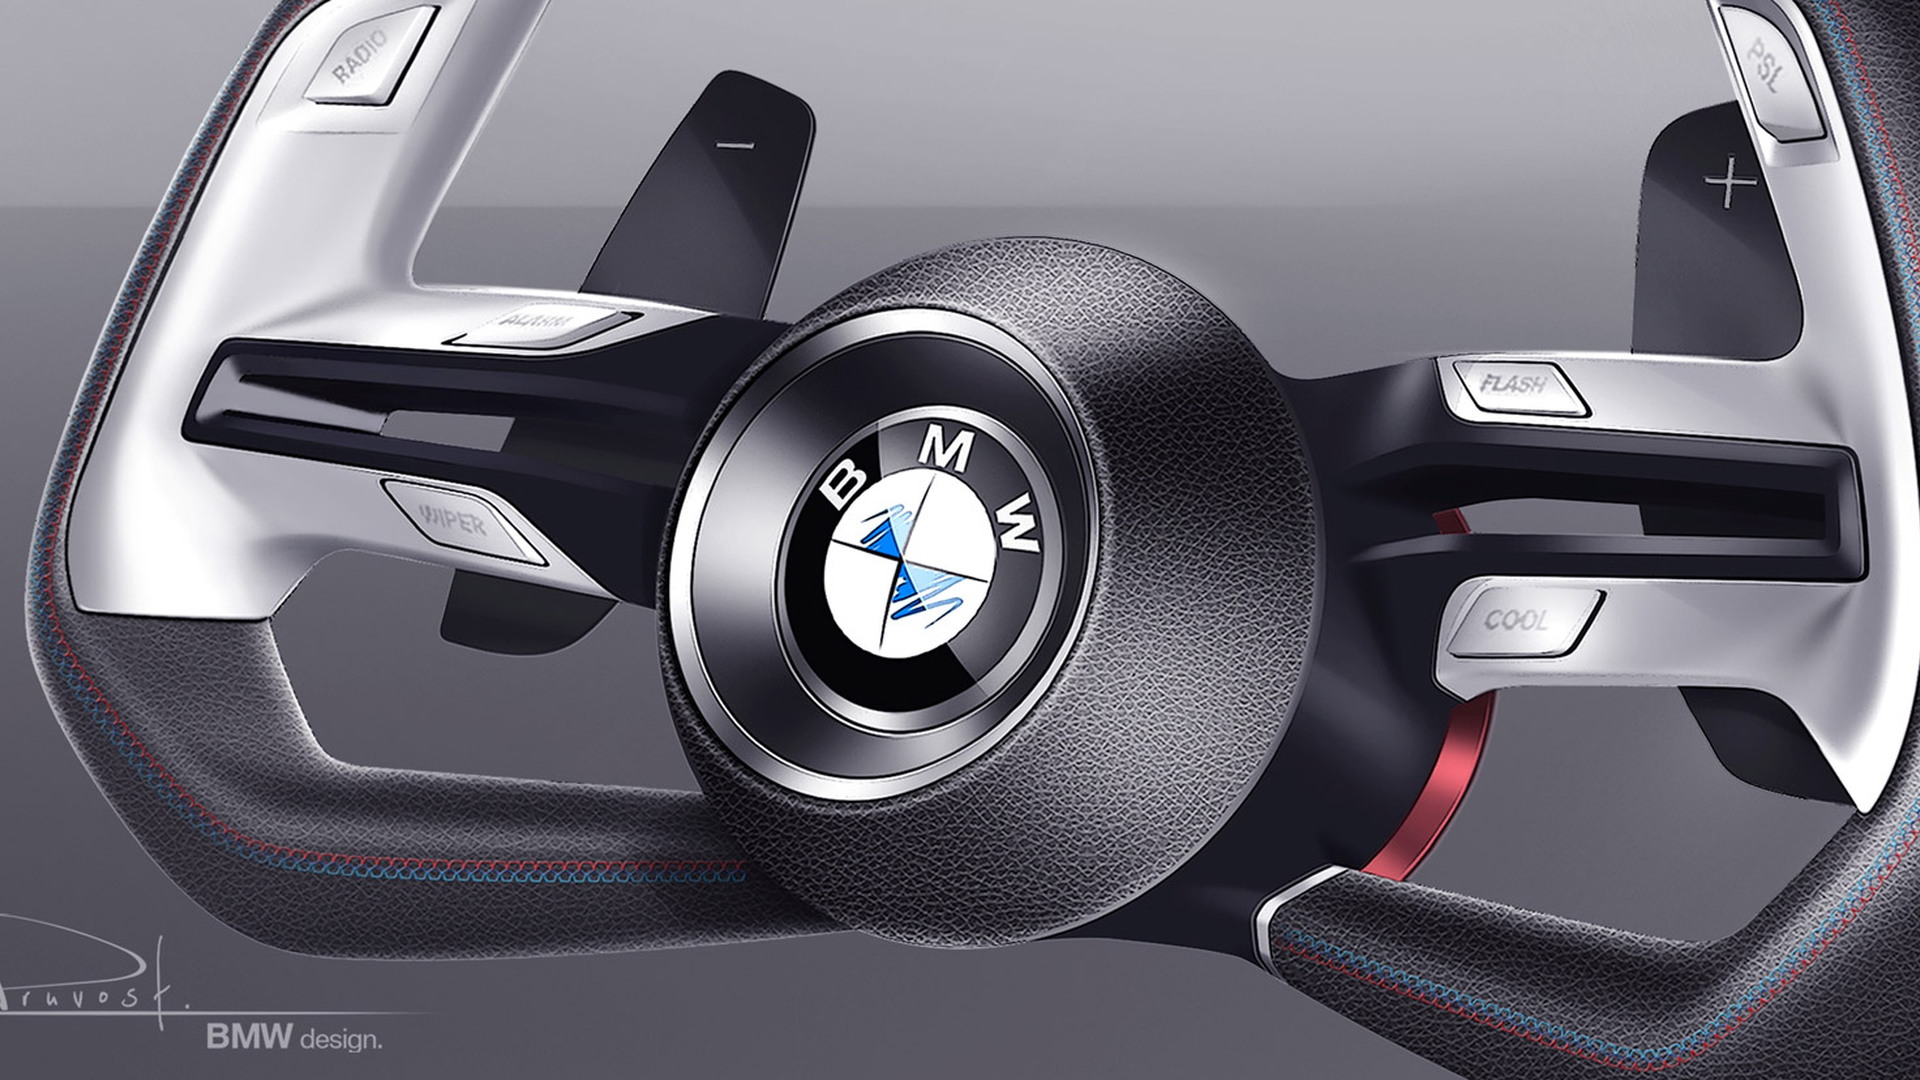 Teaser for new BMW concept debuting at 2015 Pebble Beach Concours d’Elegance